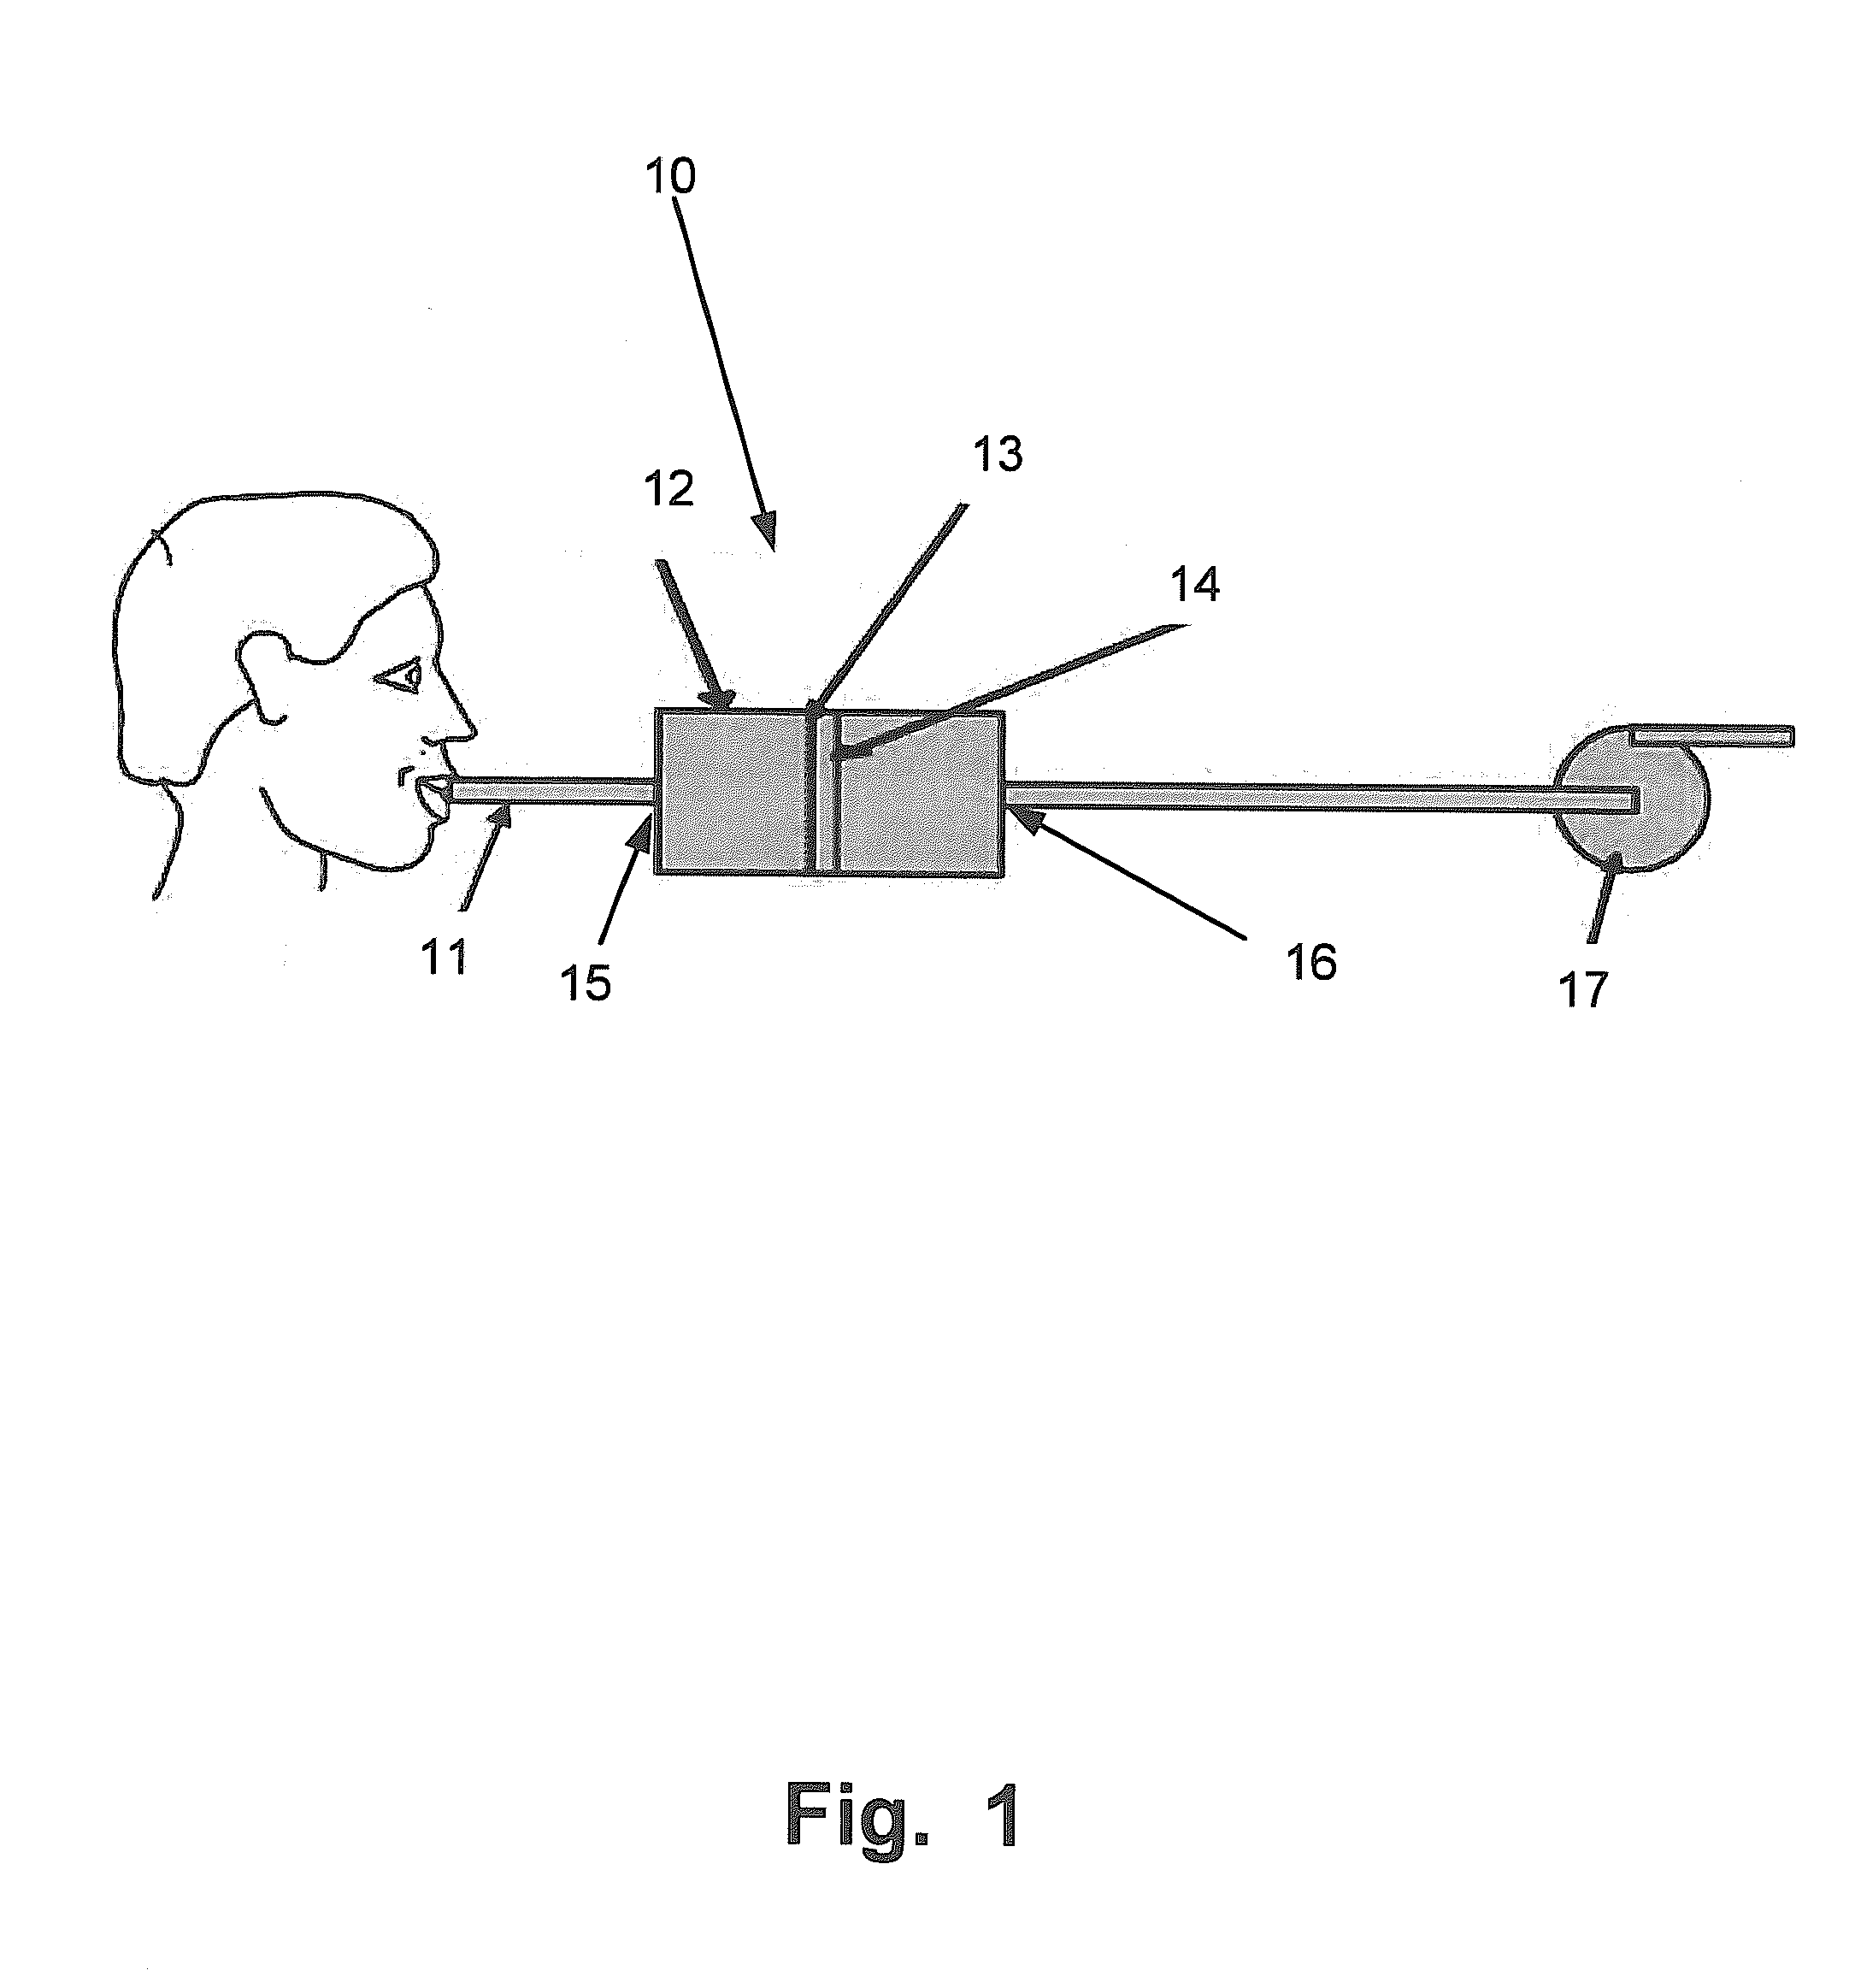 System and Method for Drug Detection in Exhaled Breath